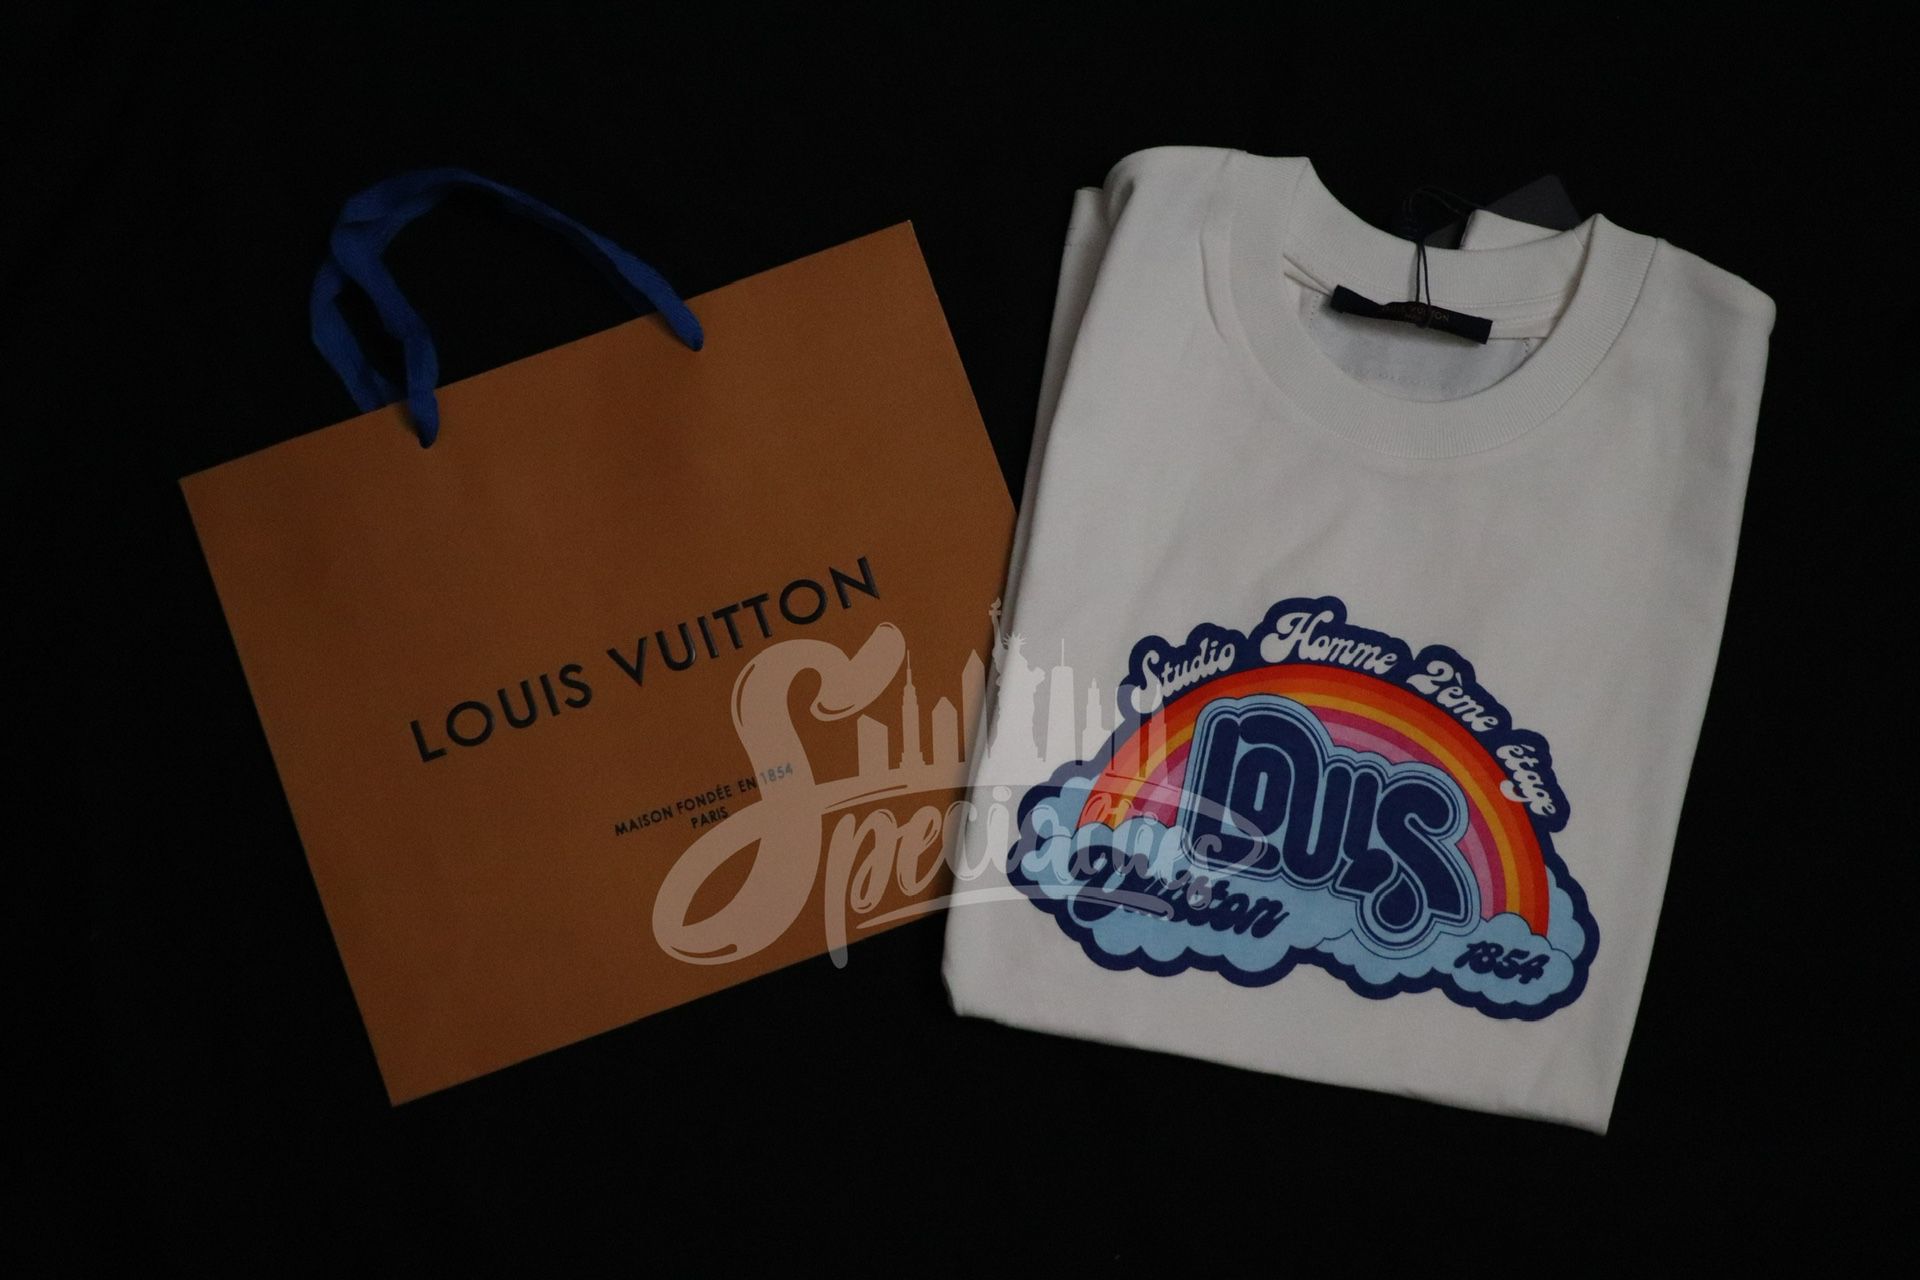 LV T-shirt Read Description White for Sale in New York, NY - OfferUp